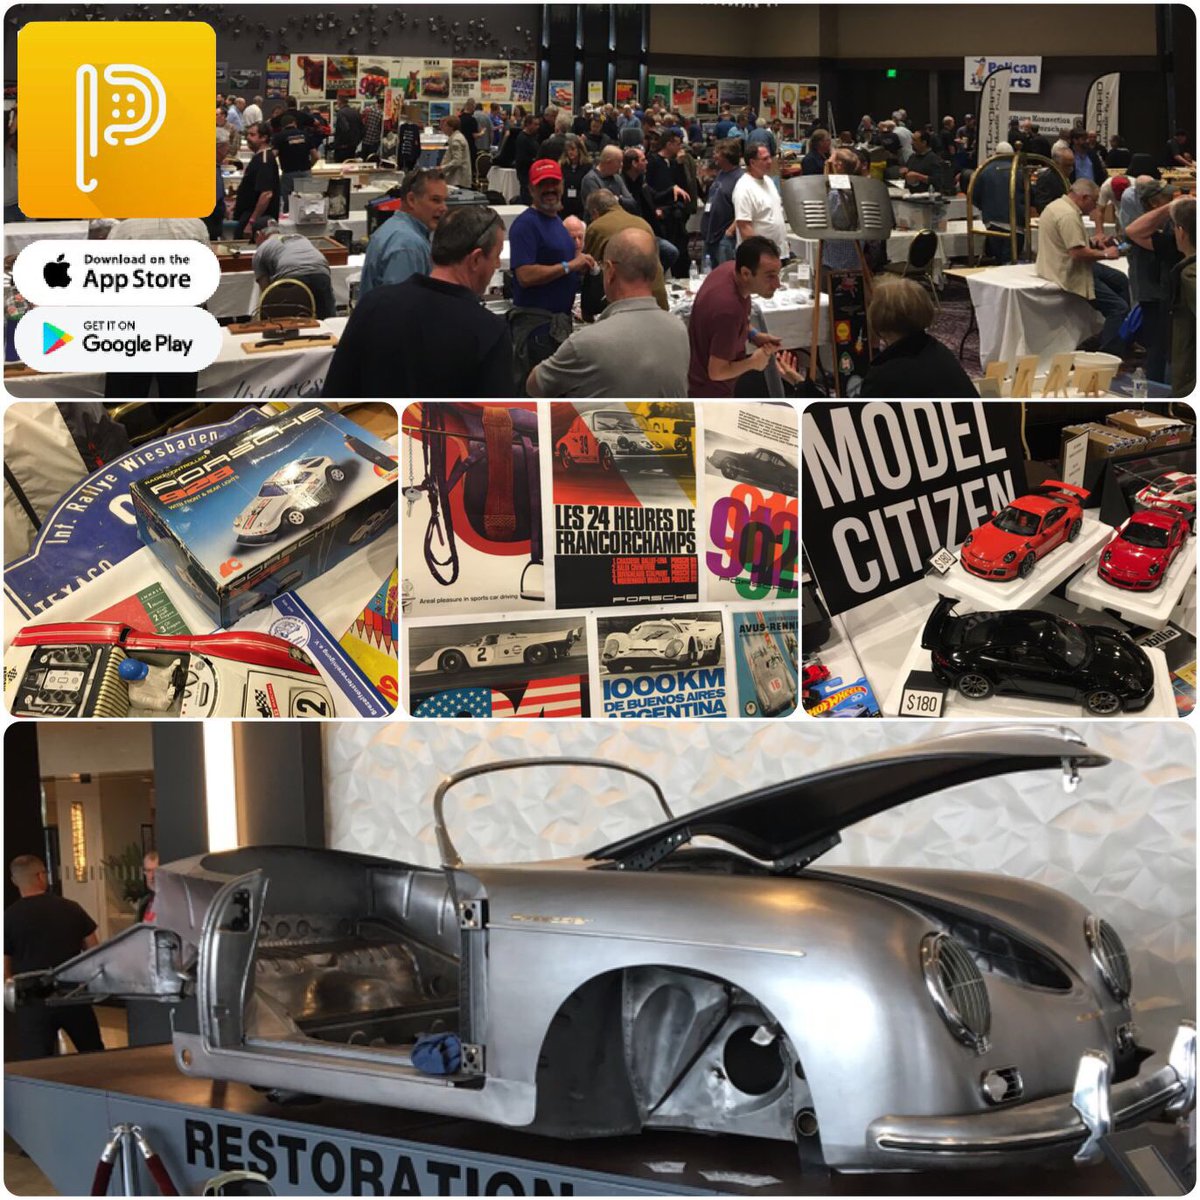 1️⃣ MORE pic’s are posted on PEDAL now. PEDAL was at the #Porsche & #VW LA Lit & Toy Show
2️⃣ PEDAL is a free, must have #automotive #enthusiast picture & video sharing #app
3️⃣ Get PEDAL - Free in app stores. PEDAL - Passion for What Moves
#lalitandtoyshow #carcollector #carparts